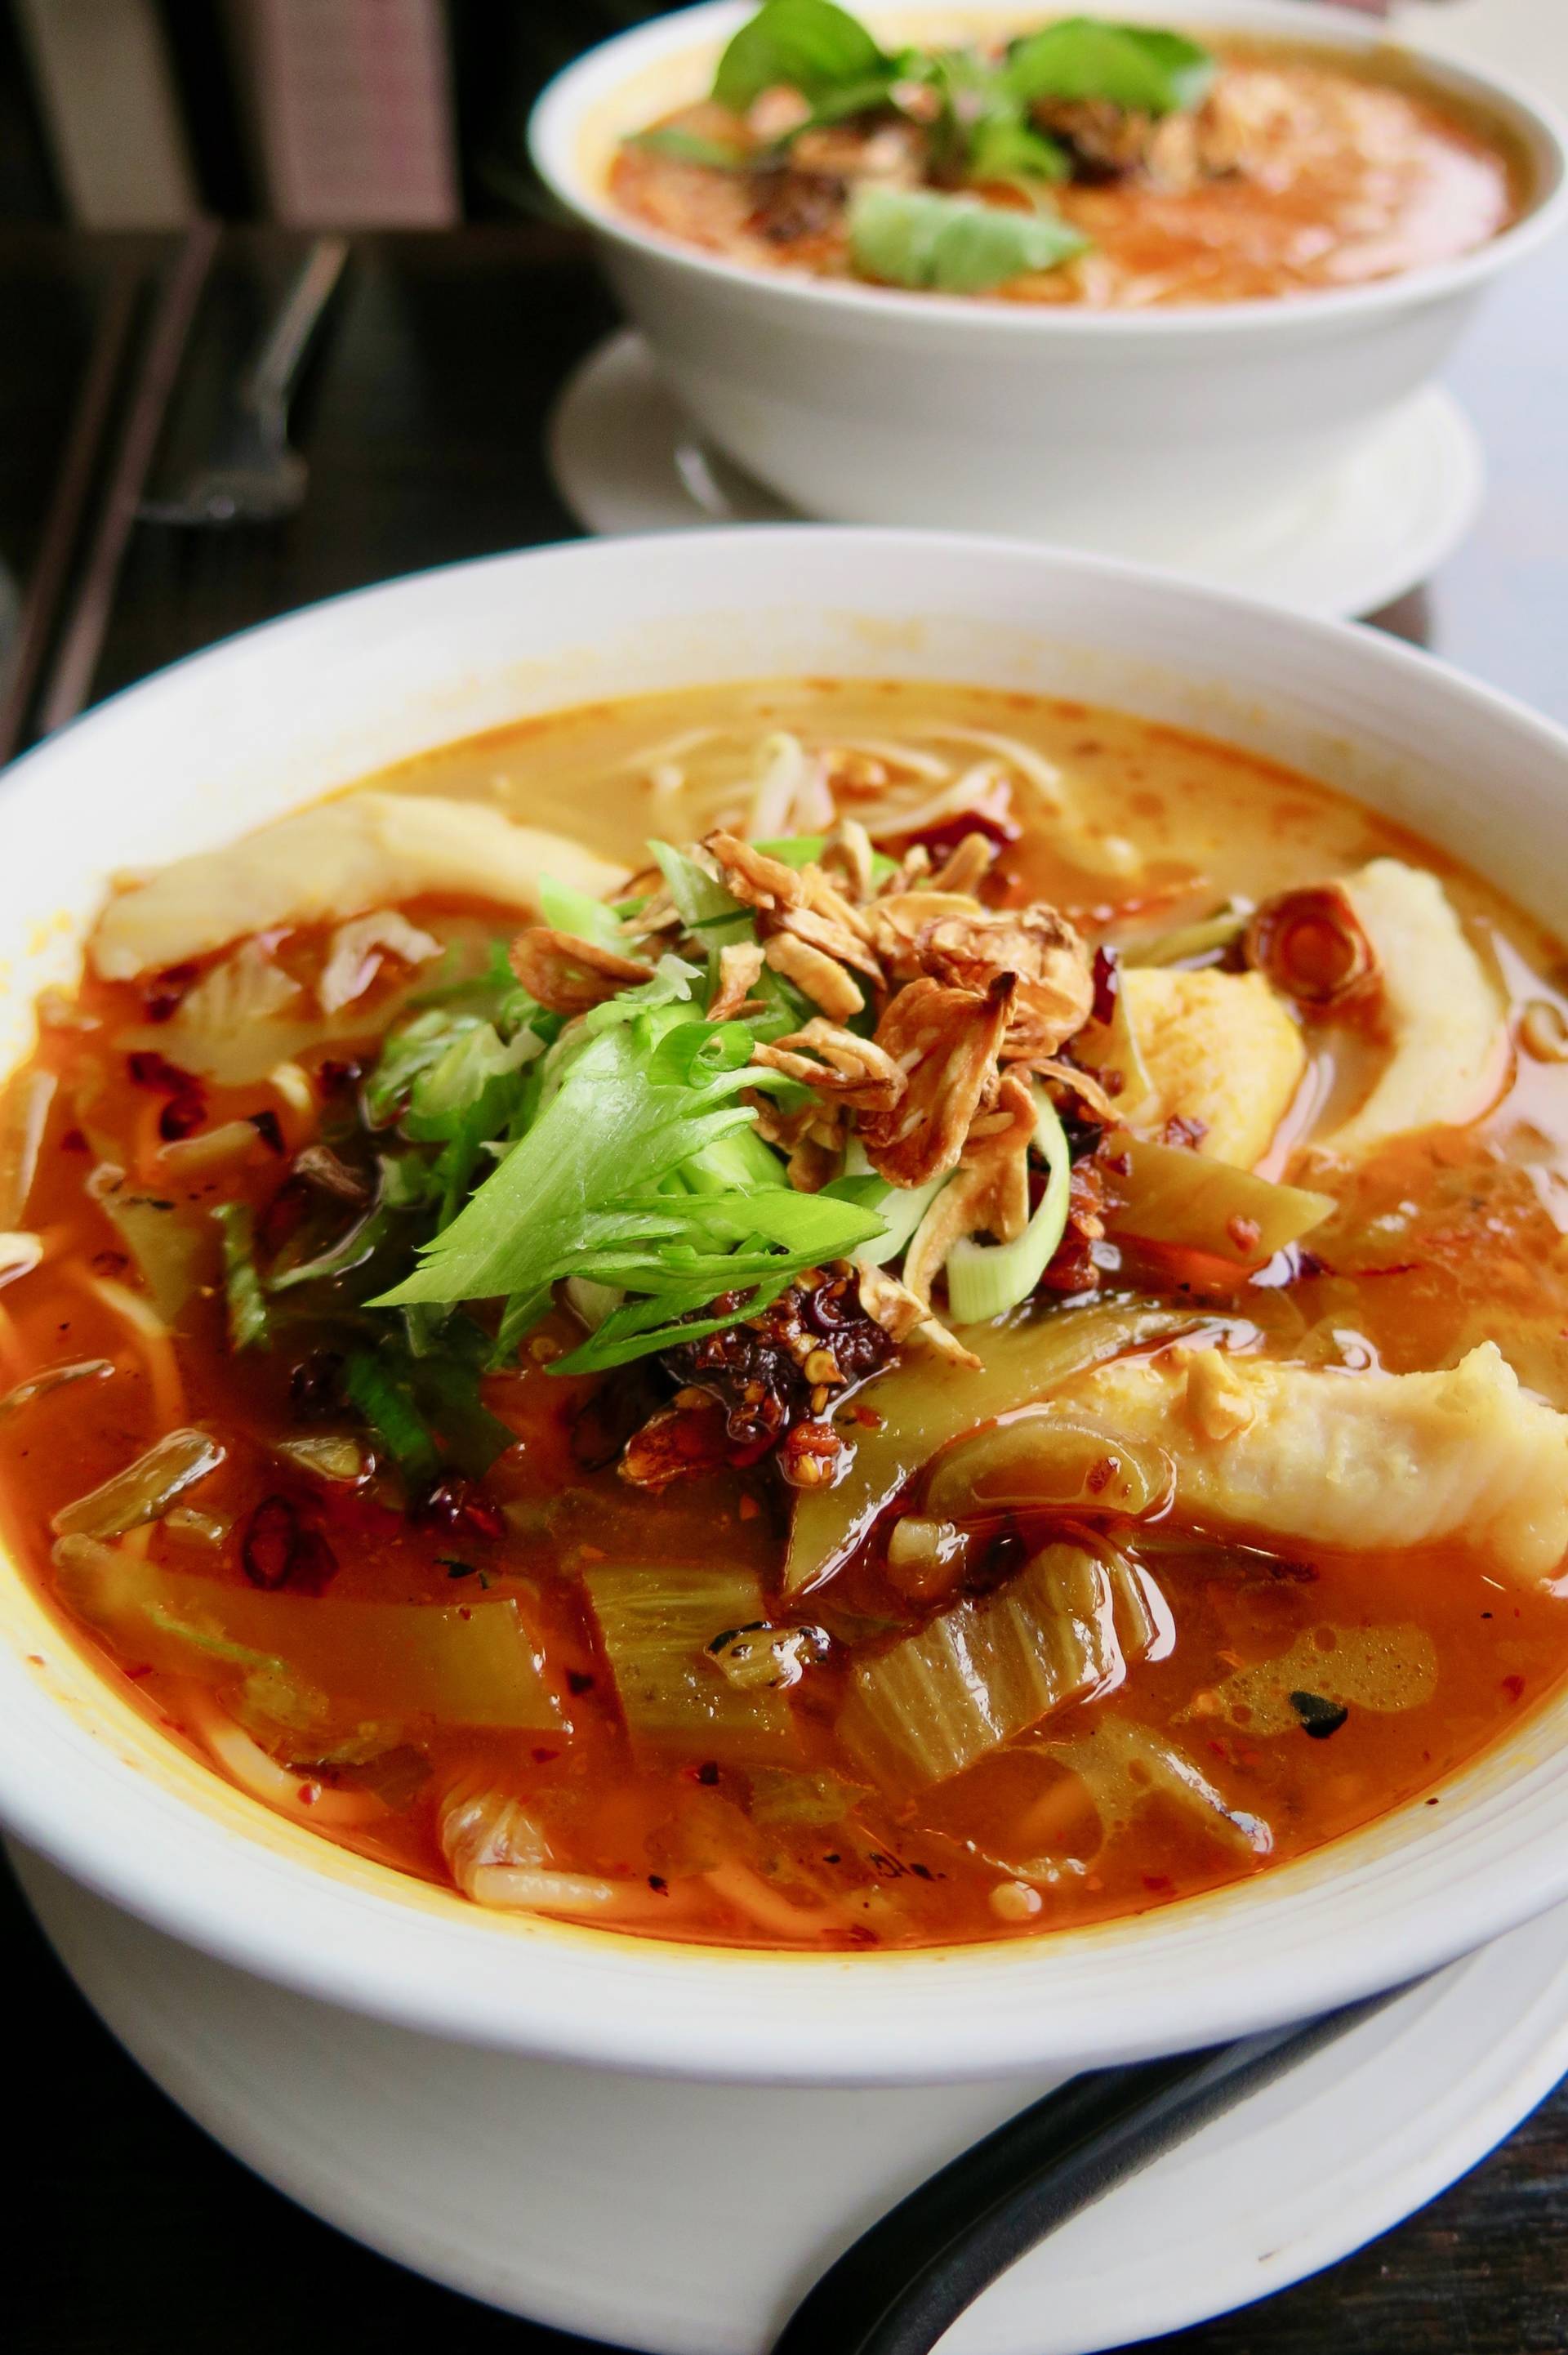 Warm up your body (and your face) with the Sichuan sole ramen at Tuezday Noodz Day.